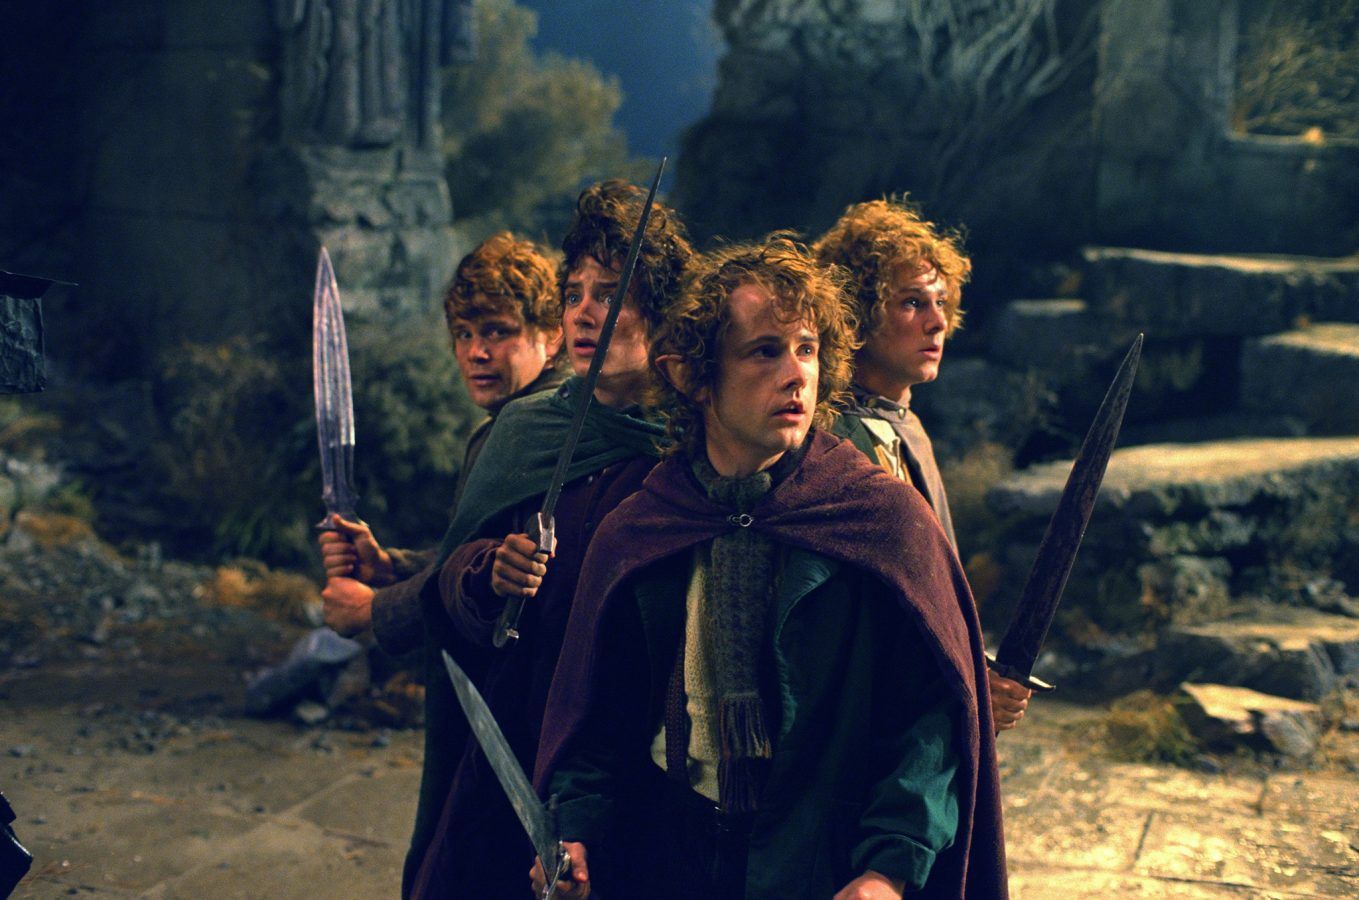 WB Moves Forward With More 'Lord of the Rings' Films But Won't